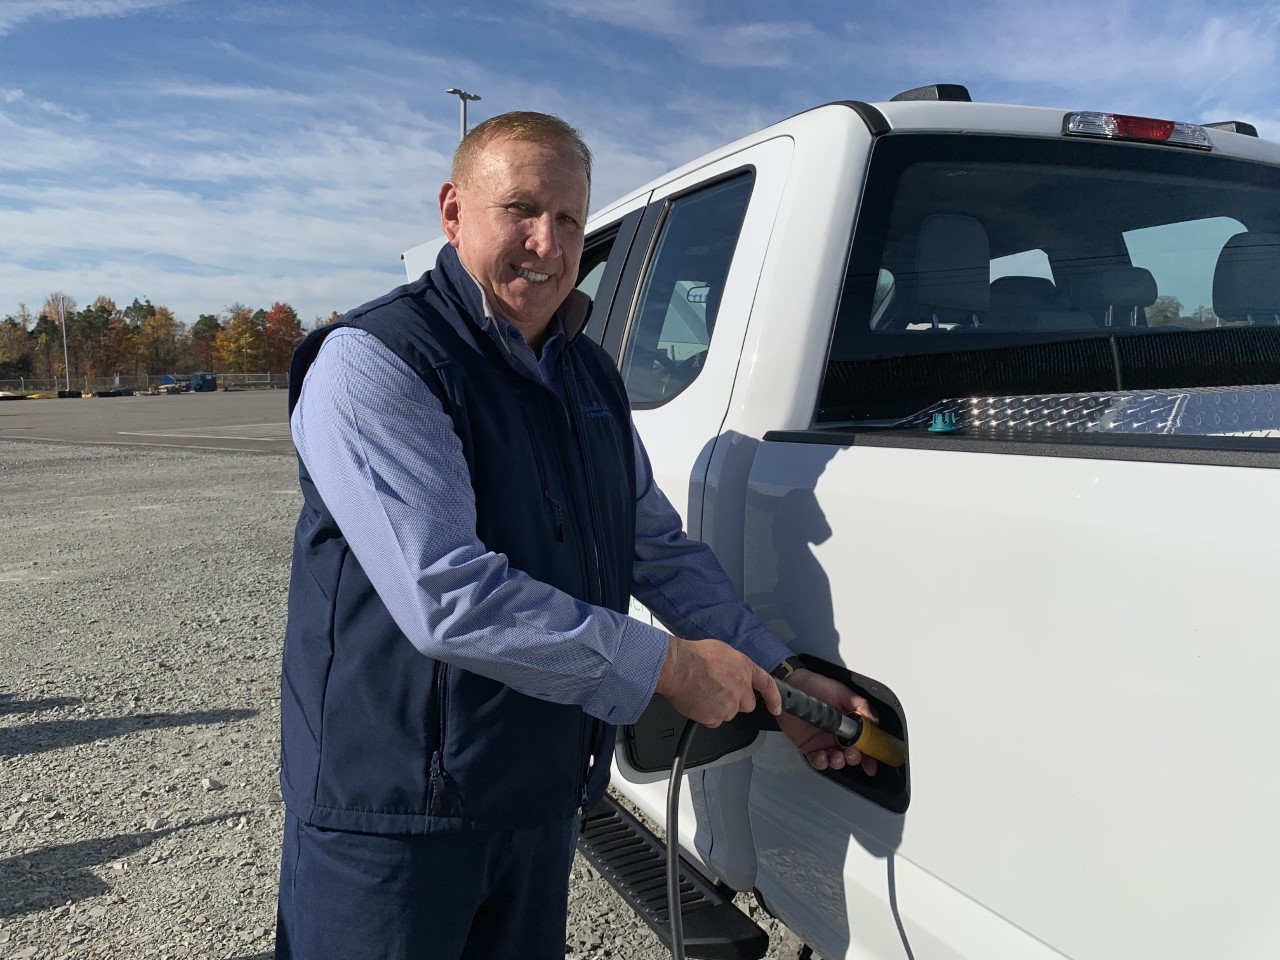 Columbia Gas field operations leader Bill Vanek drives a natural gas-powered pickup truck as part of a pilot program at the utility's recently-constructed Dunbar Twp. office located about an hour's drive southeast of Pittsburgh.